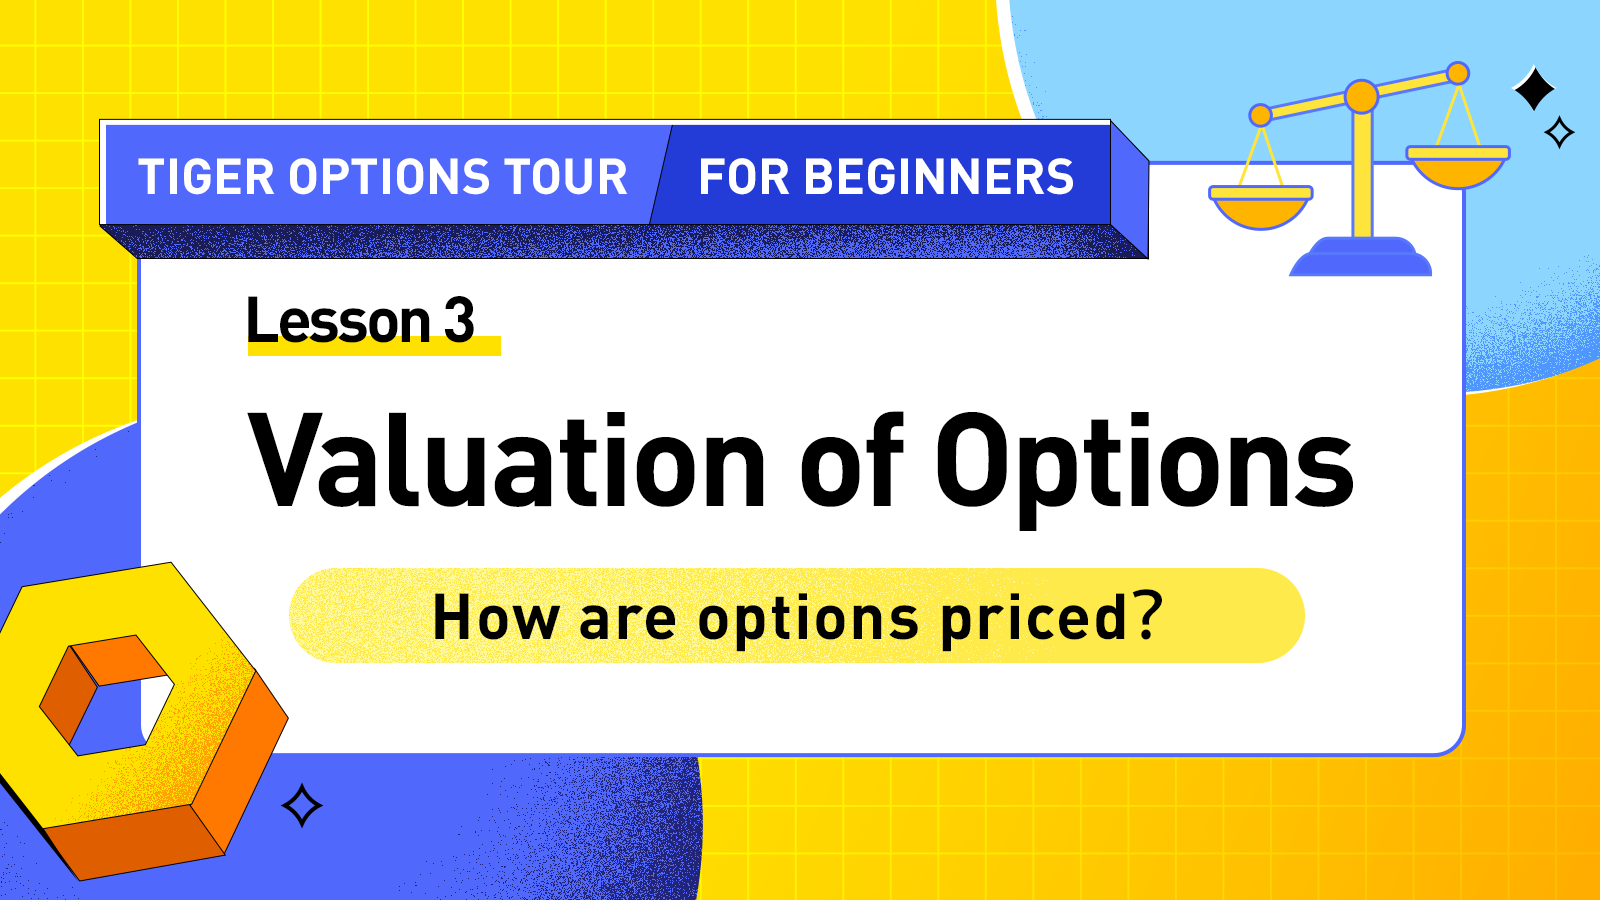 Lesson 3: Valuation of Options